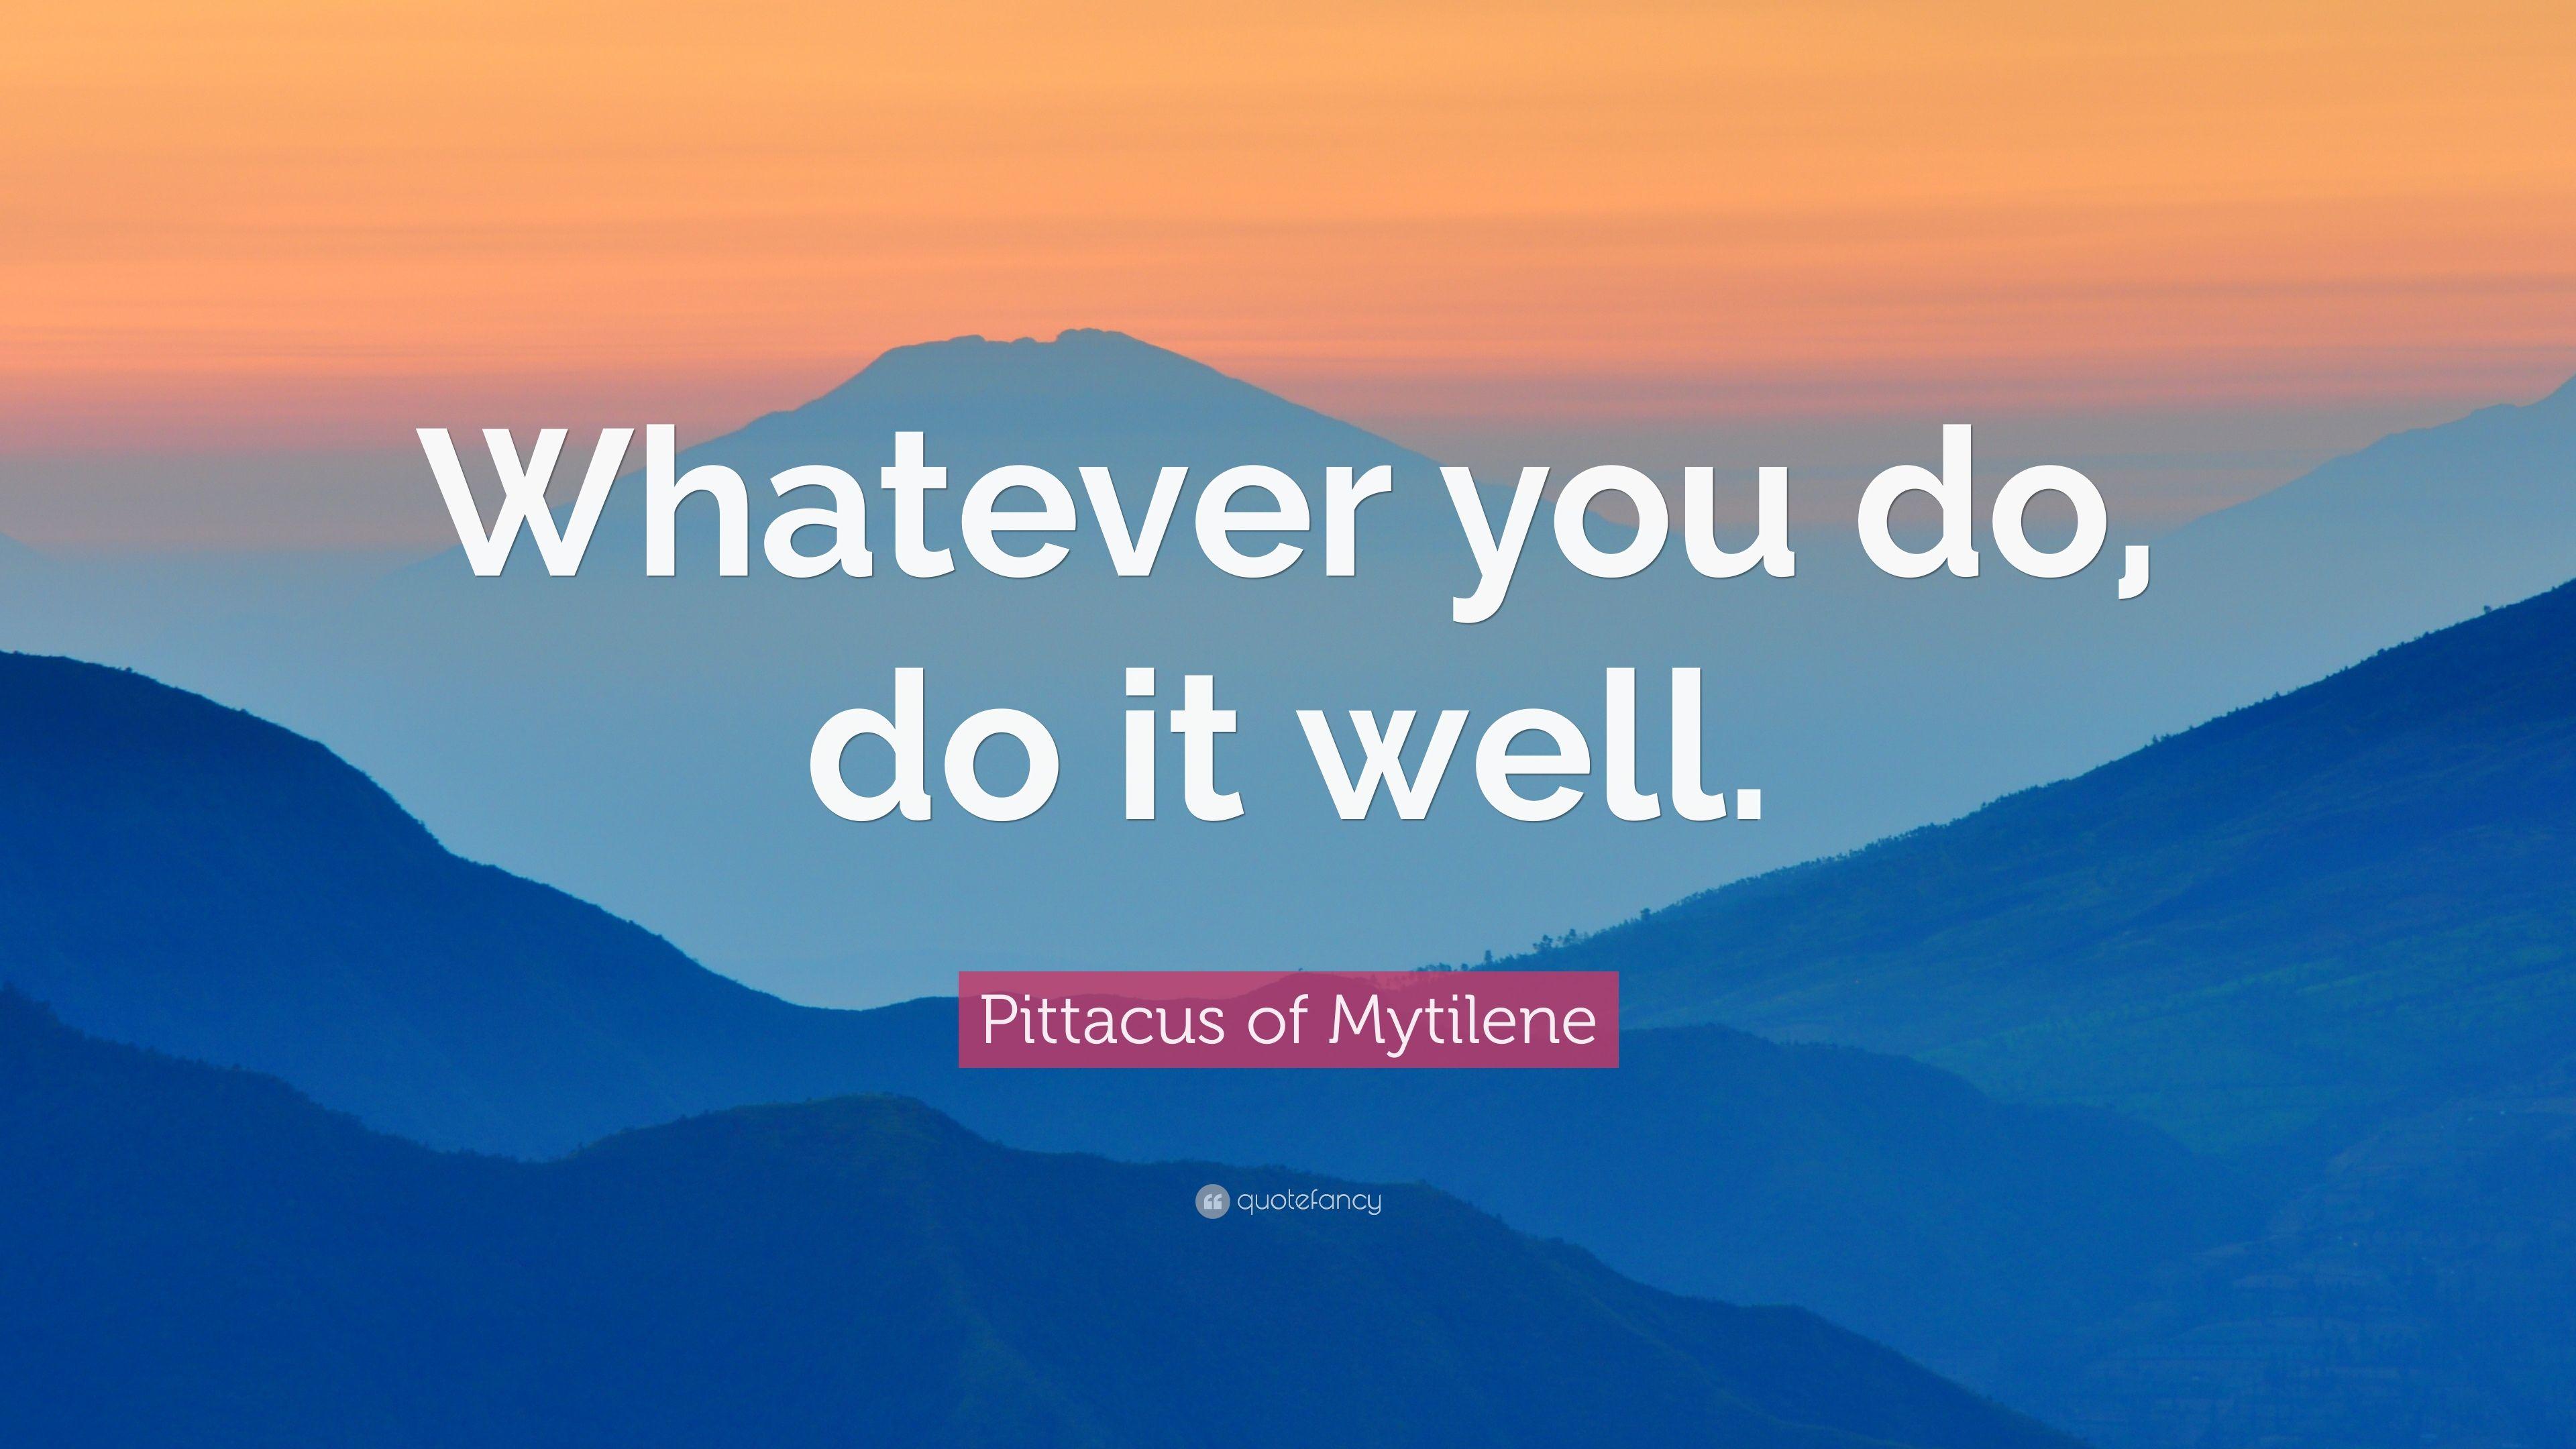 Pittacus of Mytilene Quote: “Whatever you do, do it well.” 9